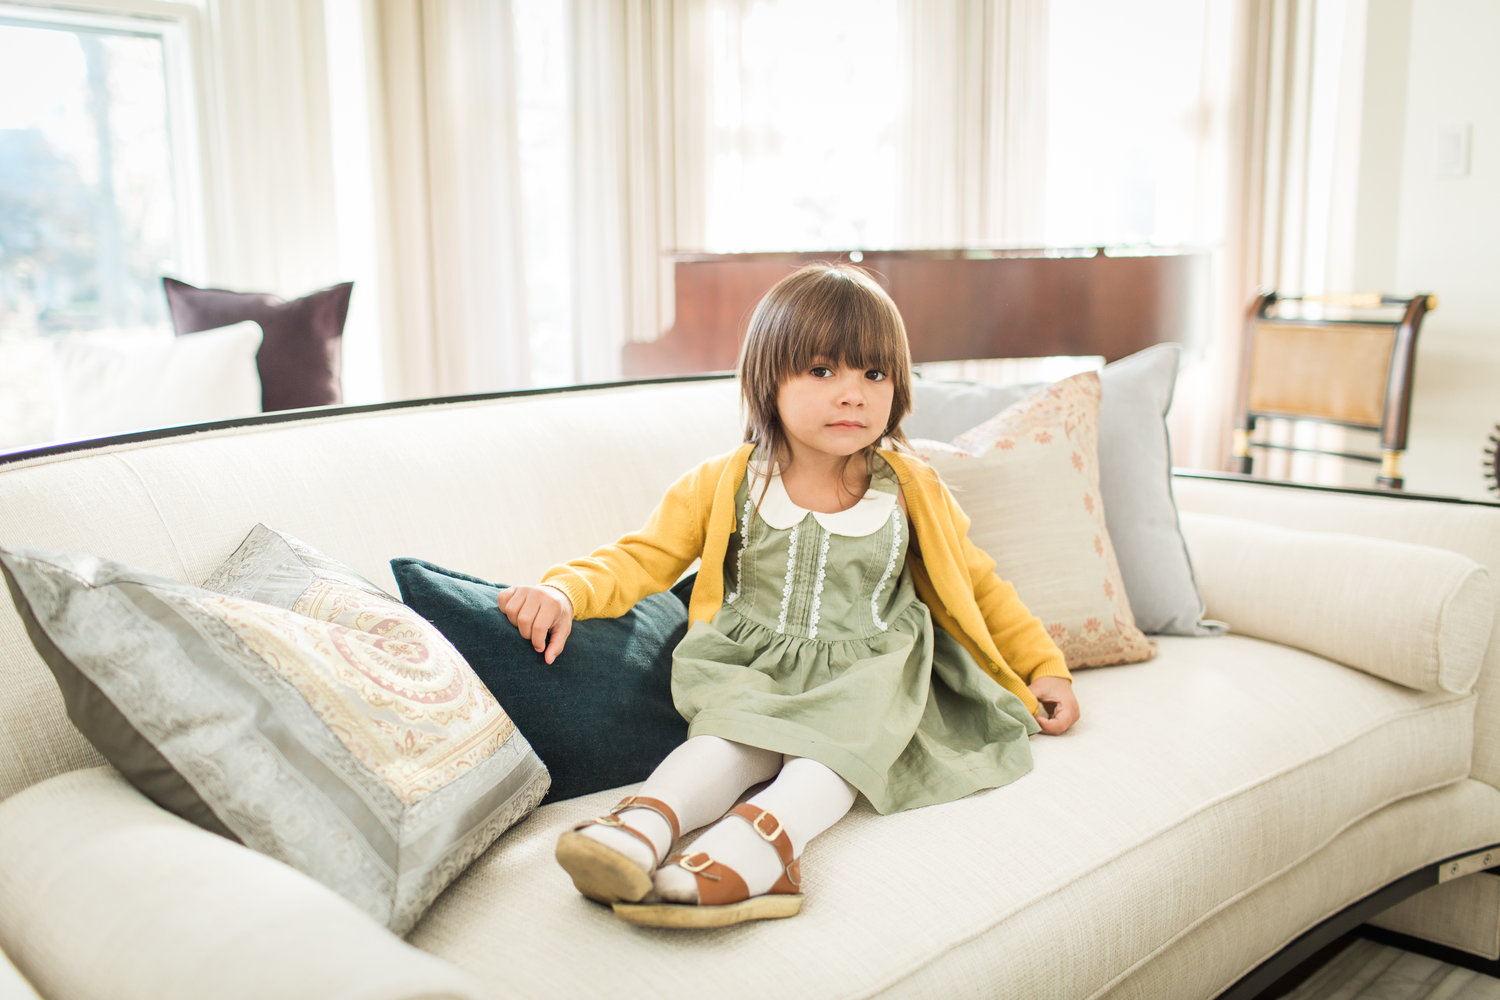 Stylish Kids Spring Outfits That Are Cuteness Overload